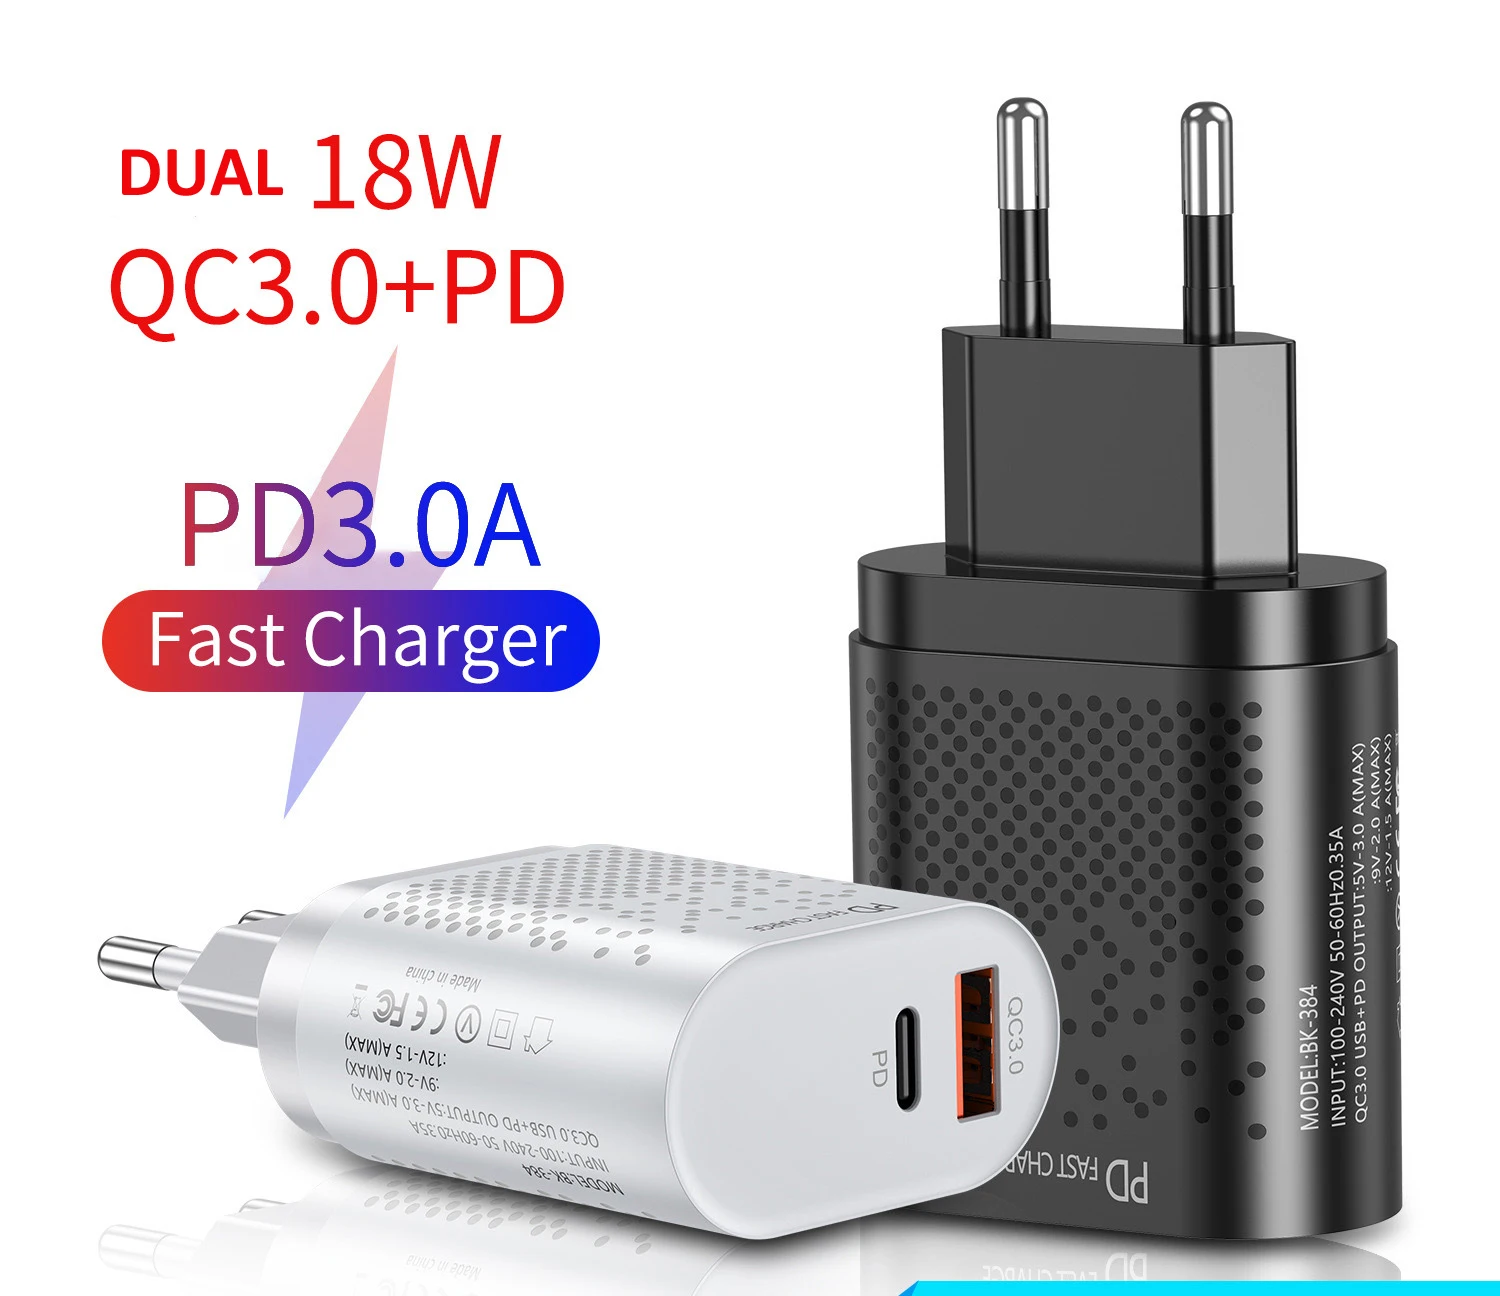 

New Arrival 2021 dual USB port mobile fast QC 3.0 + PD 36w wall charger type C, Black, white